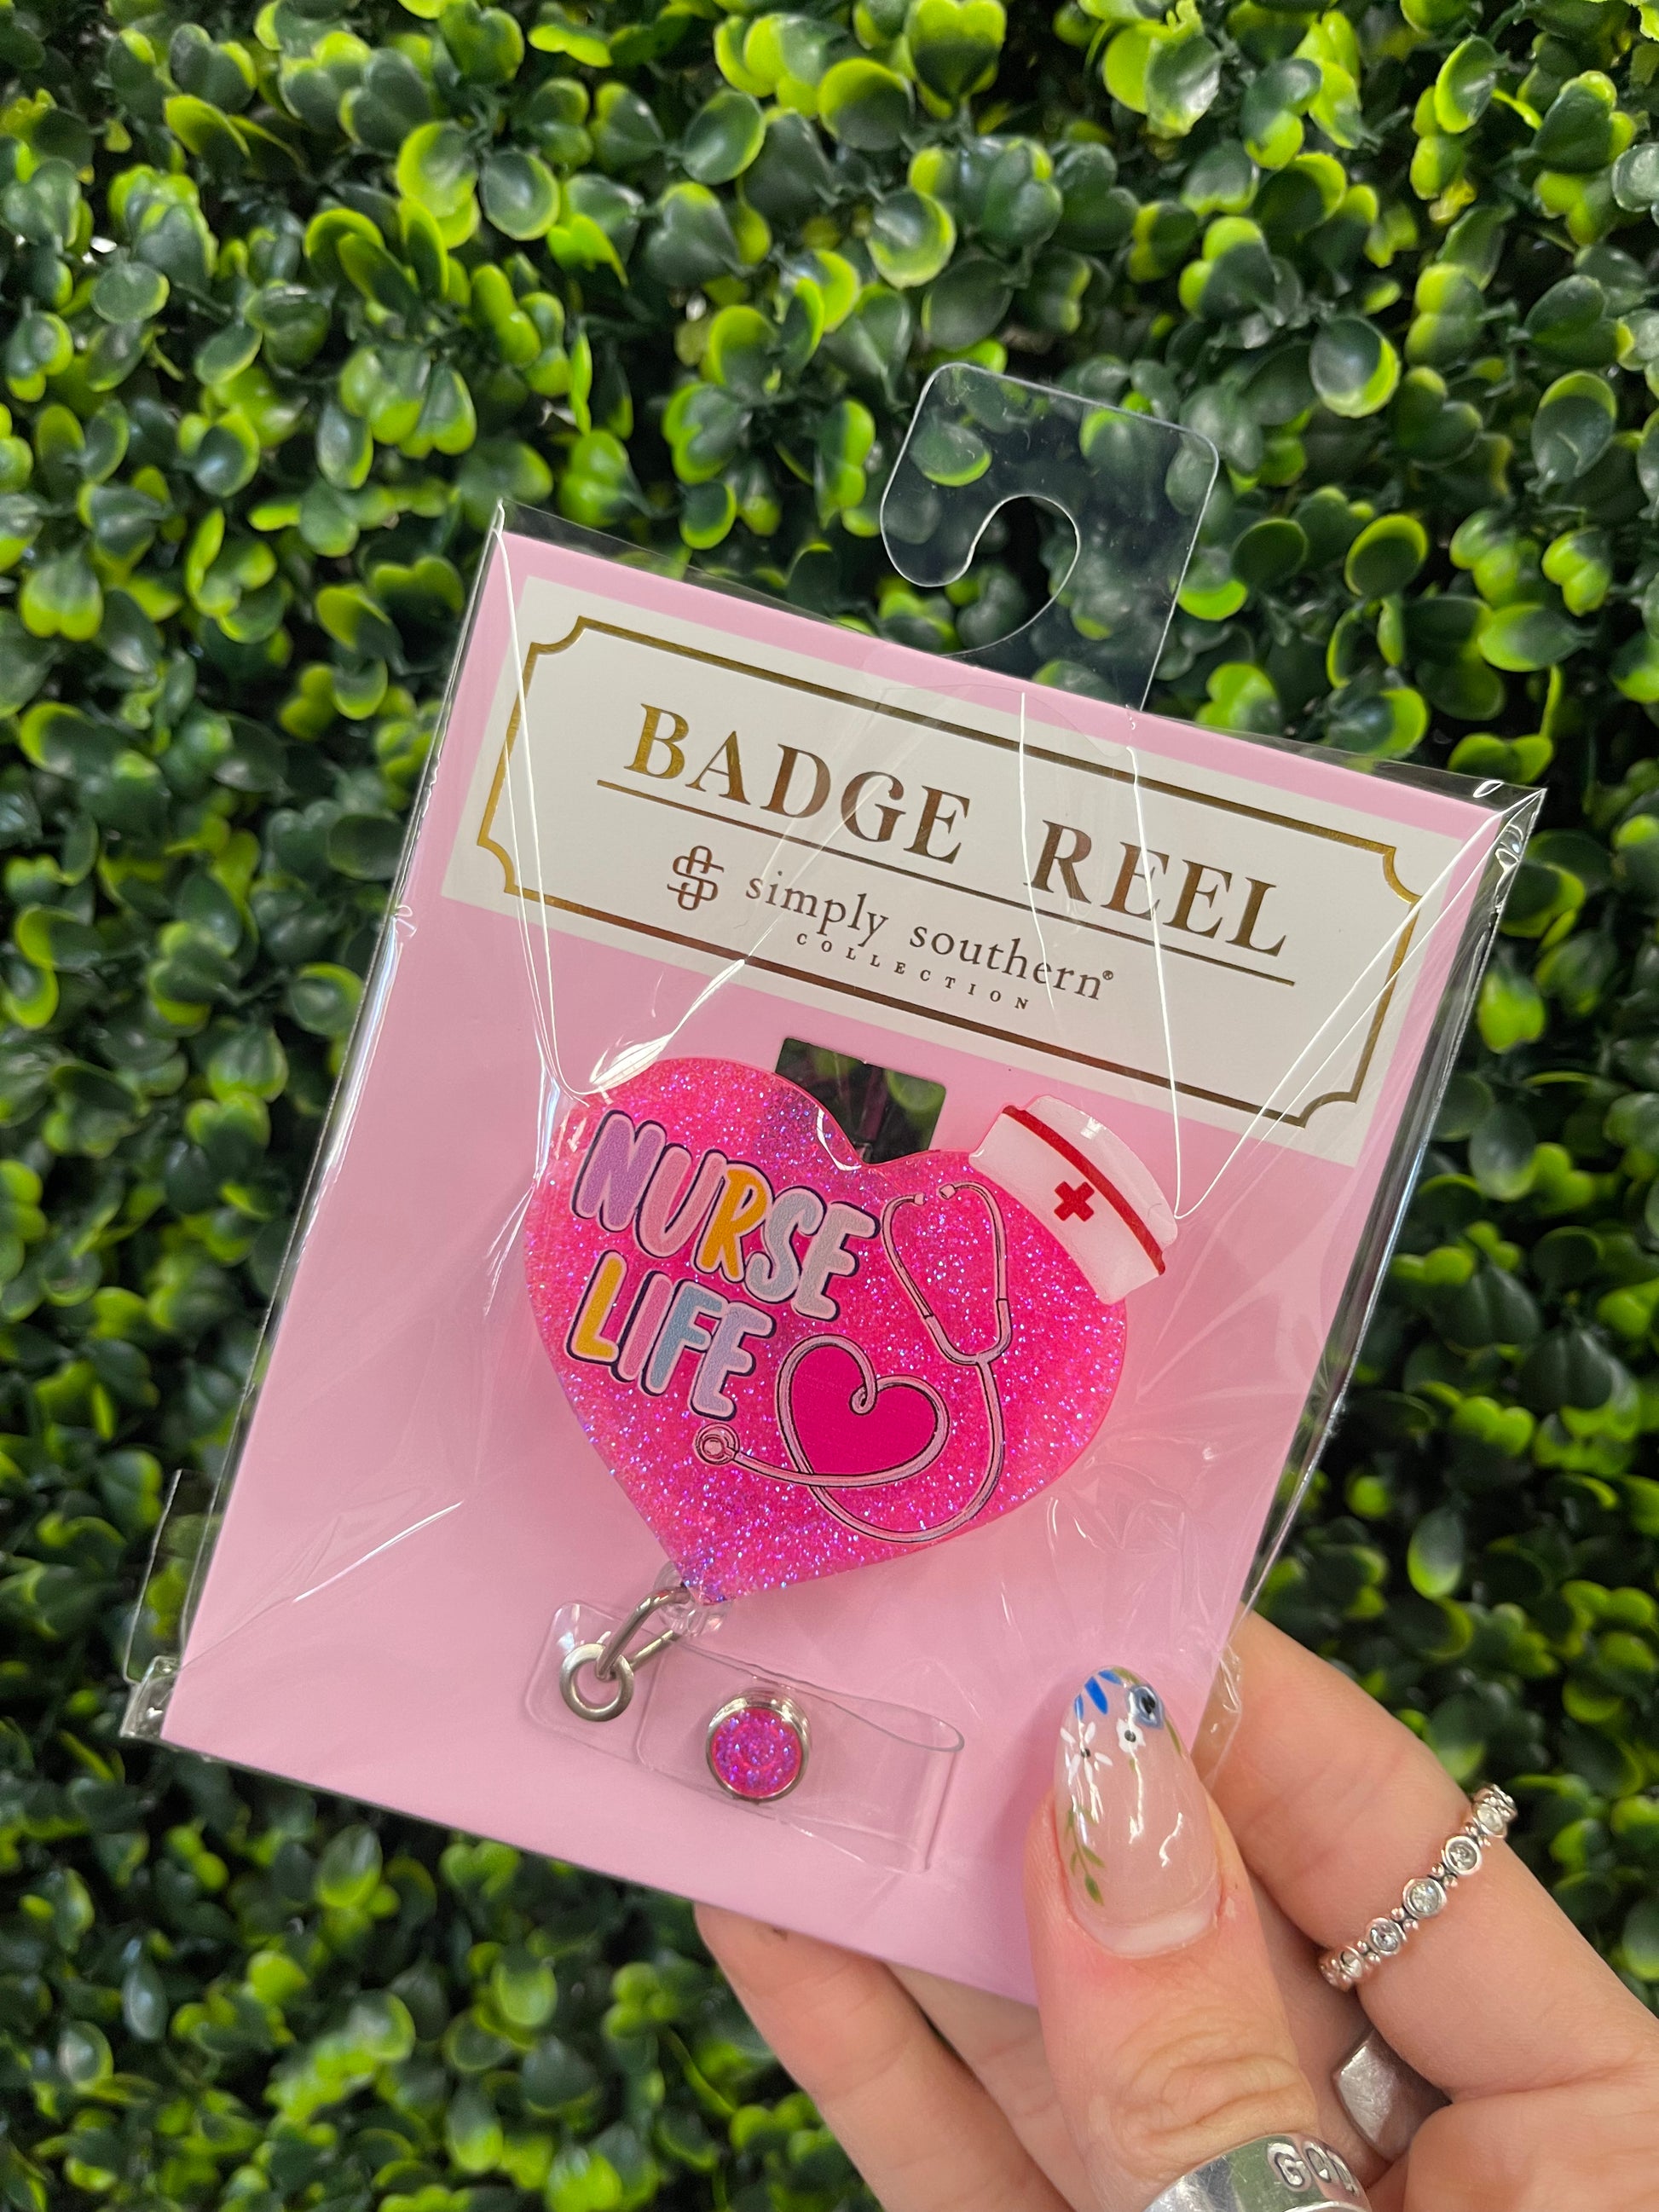 SIMPLY SOUTHERN BADGE REEL – Southern Clothing And More